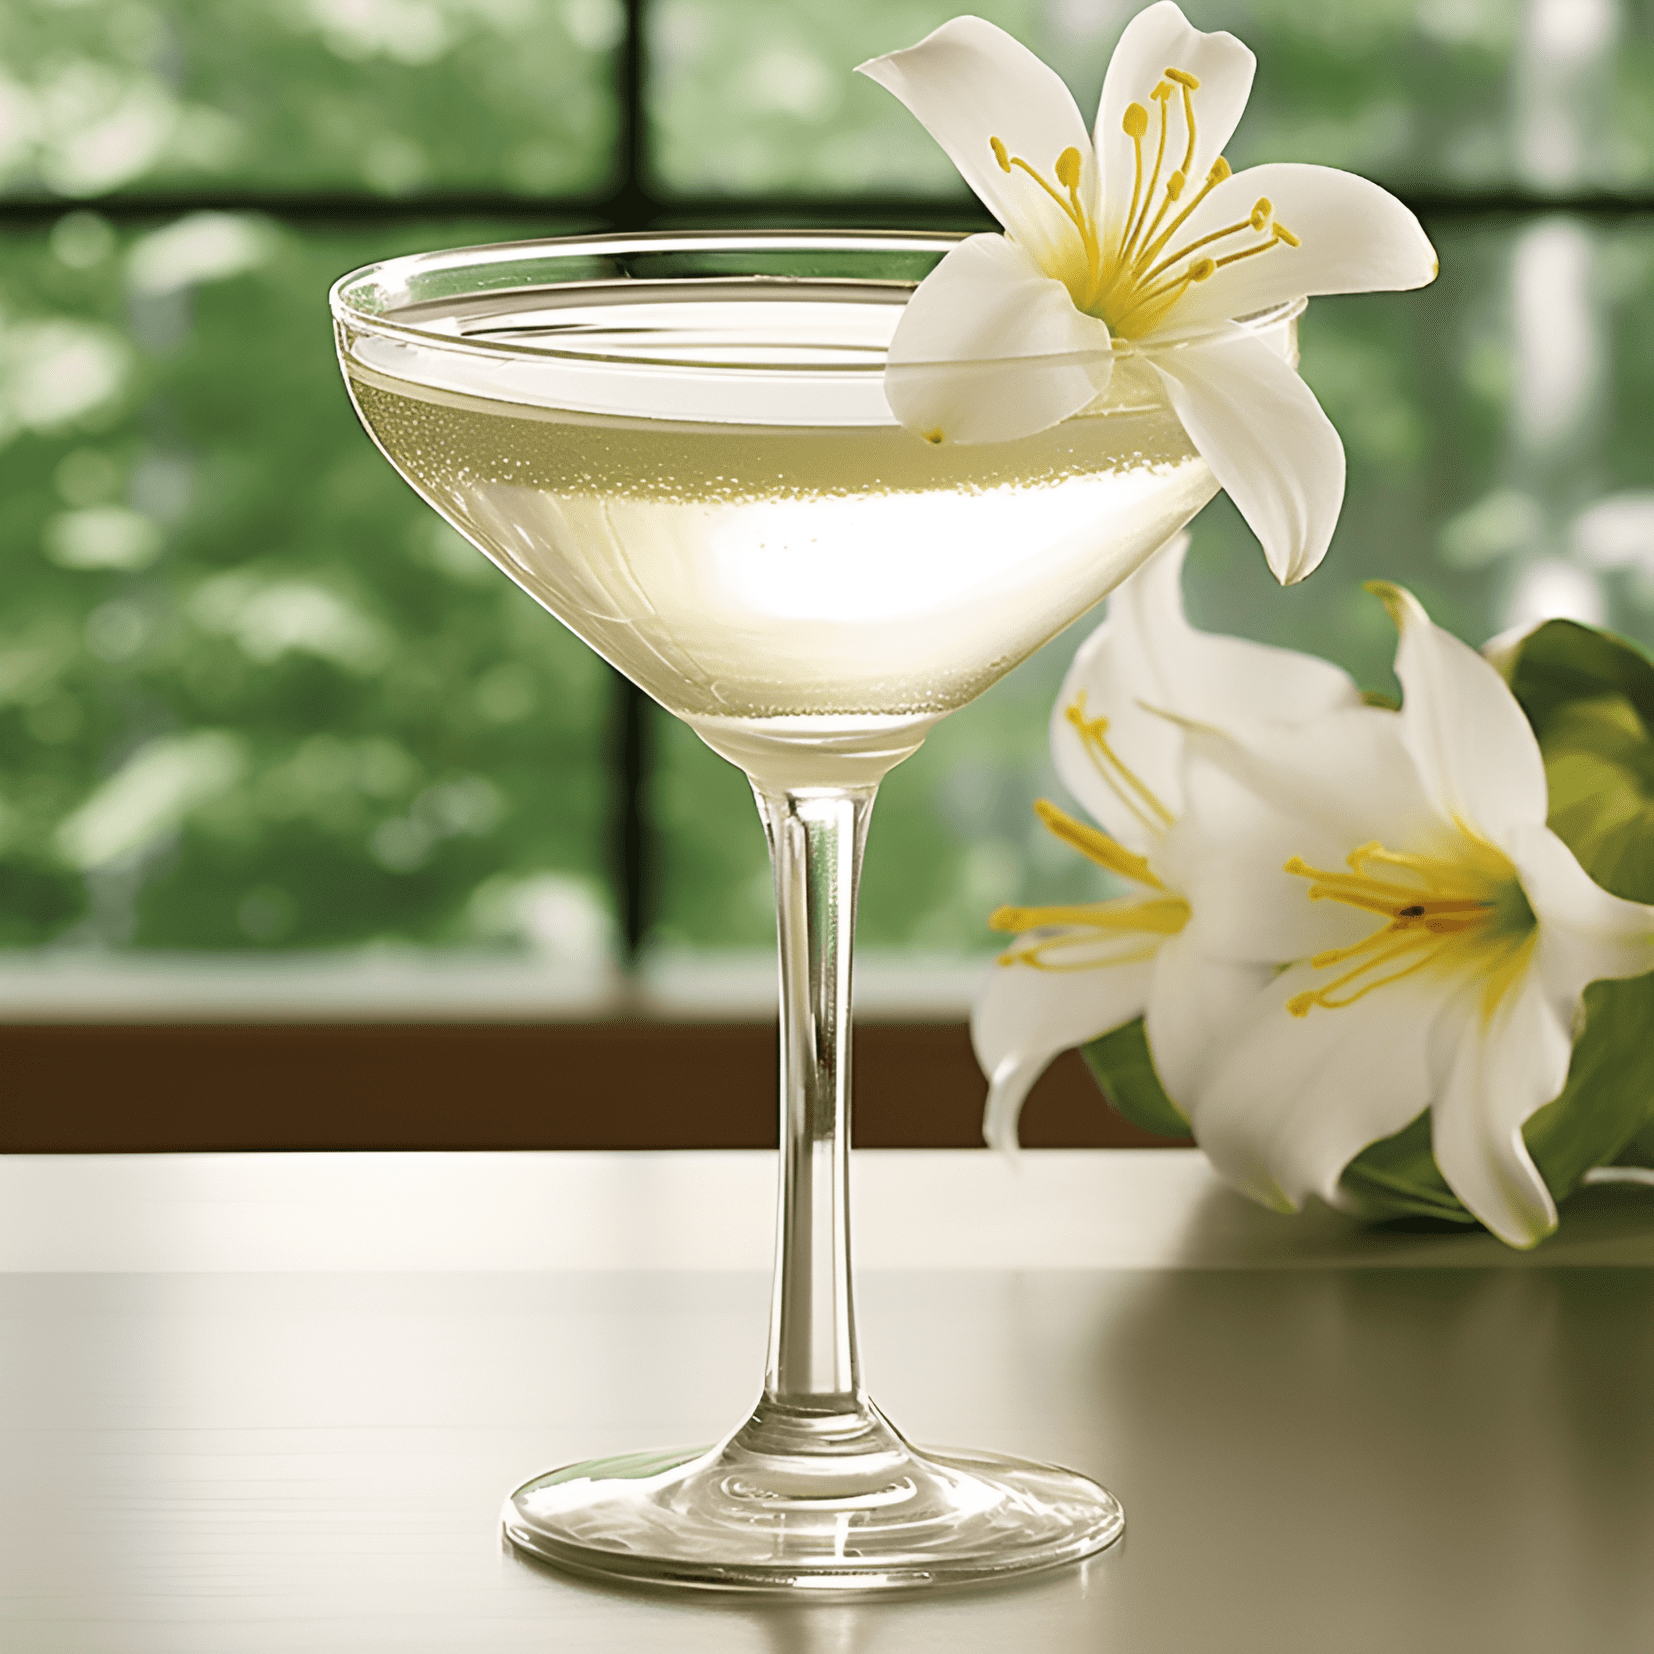 White Lily Cocktail Recipe - The White Lily cocktail is light, floral, and slightly sweet with a hint of citrus. The combination of gin, orange liqueur, and lemon juice creates a well-balanced and refreshing flavor profile.